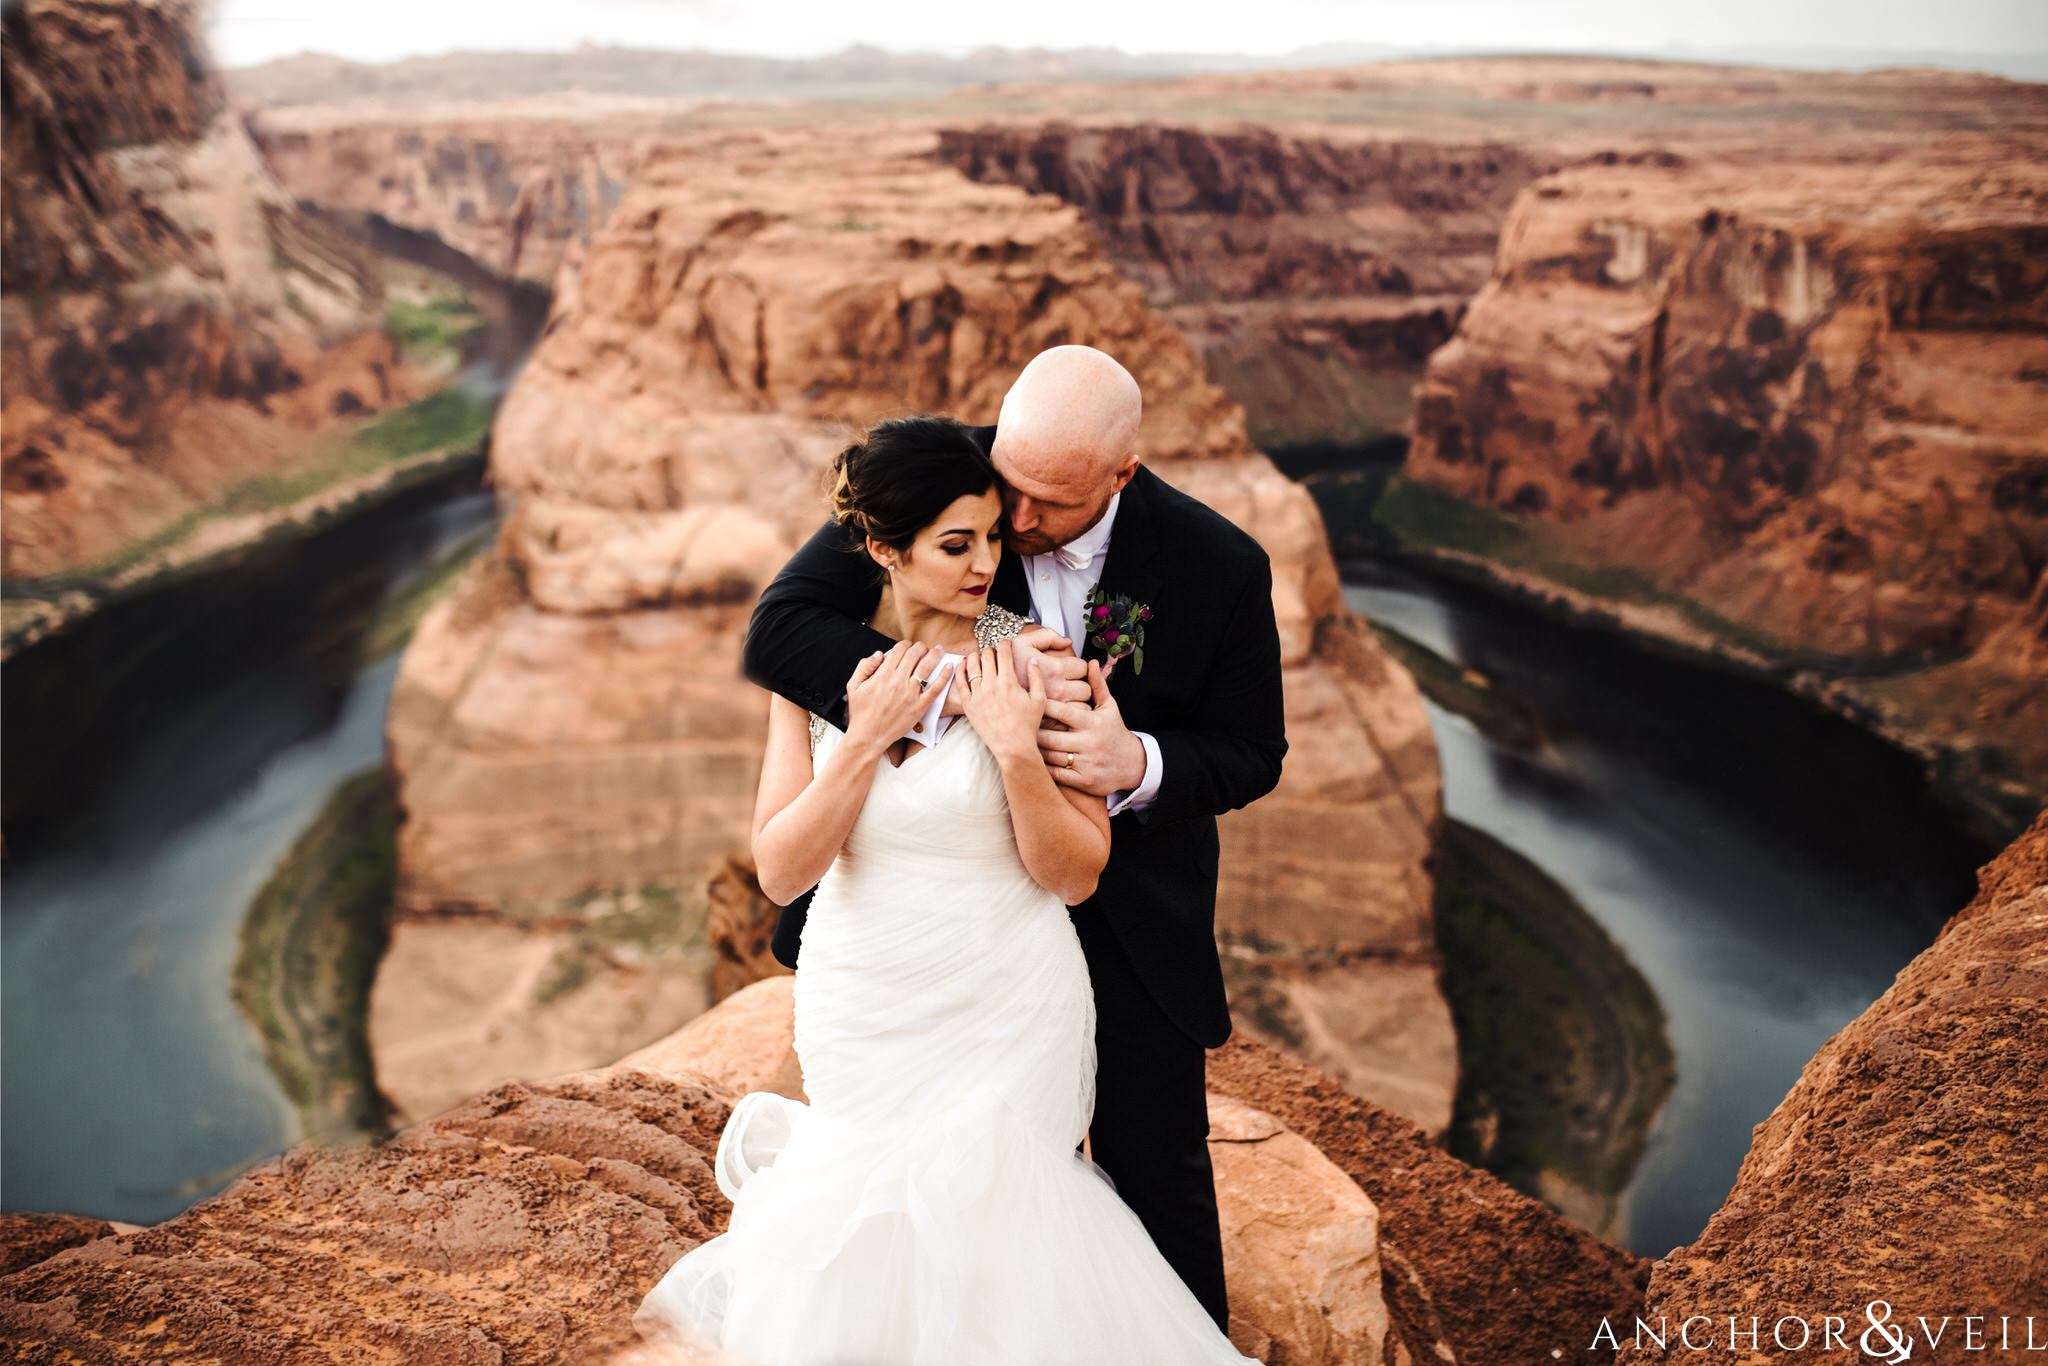 holding her from behind during their Horseshoe Bend Elopement Wedding